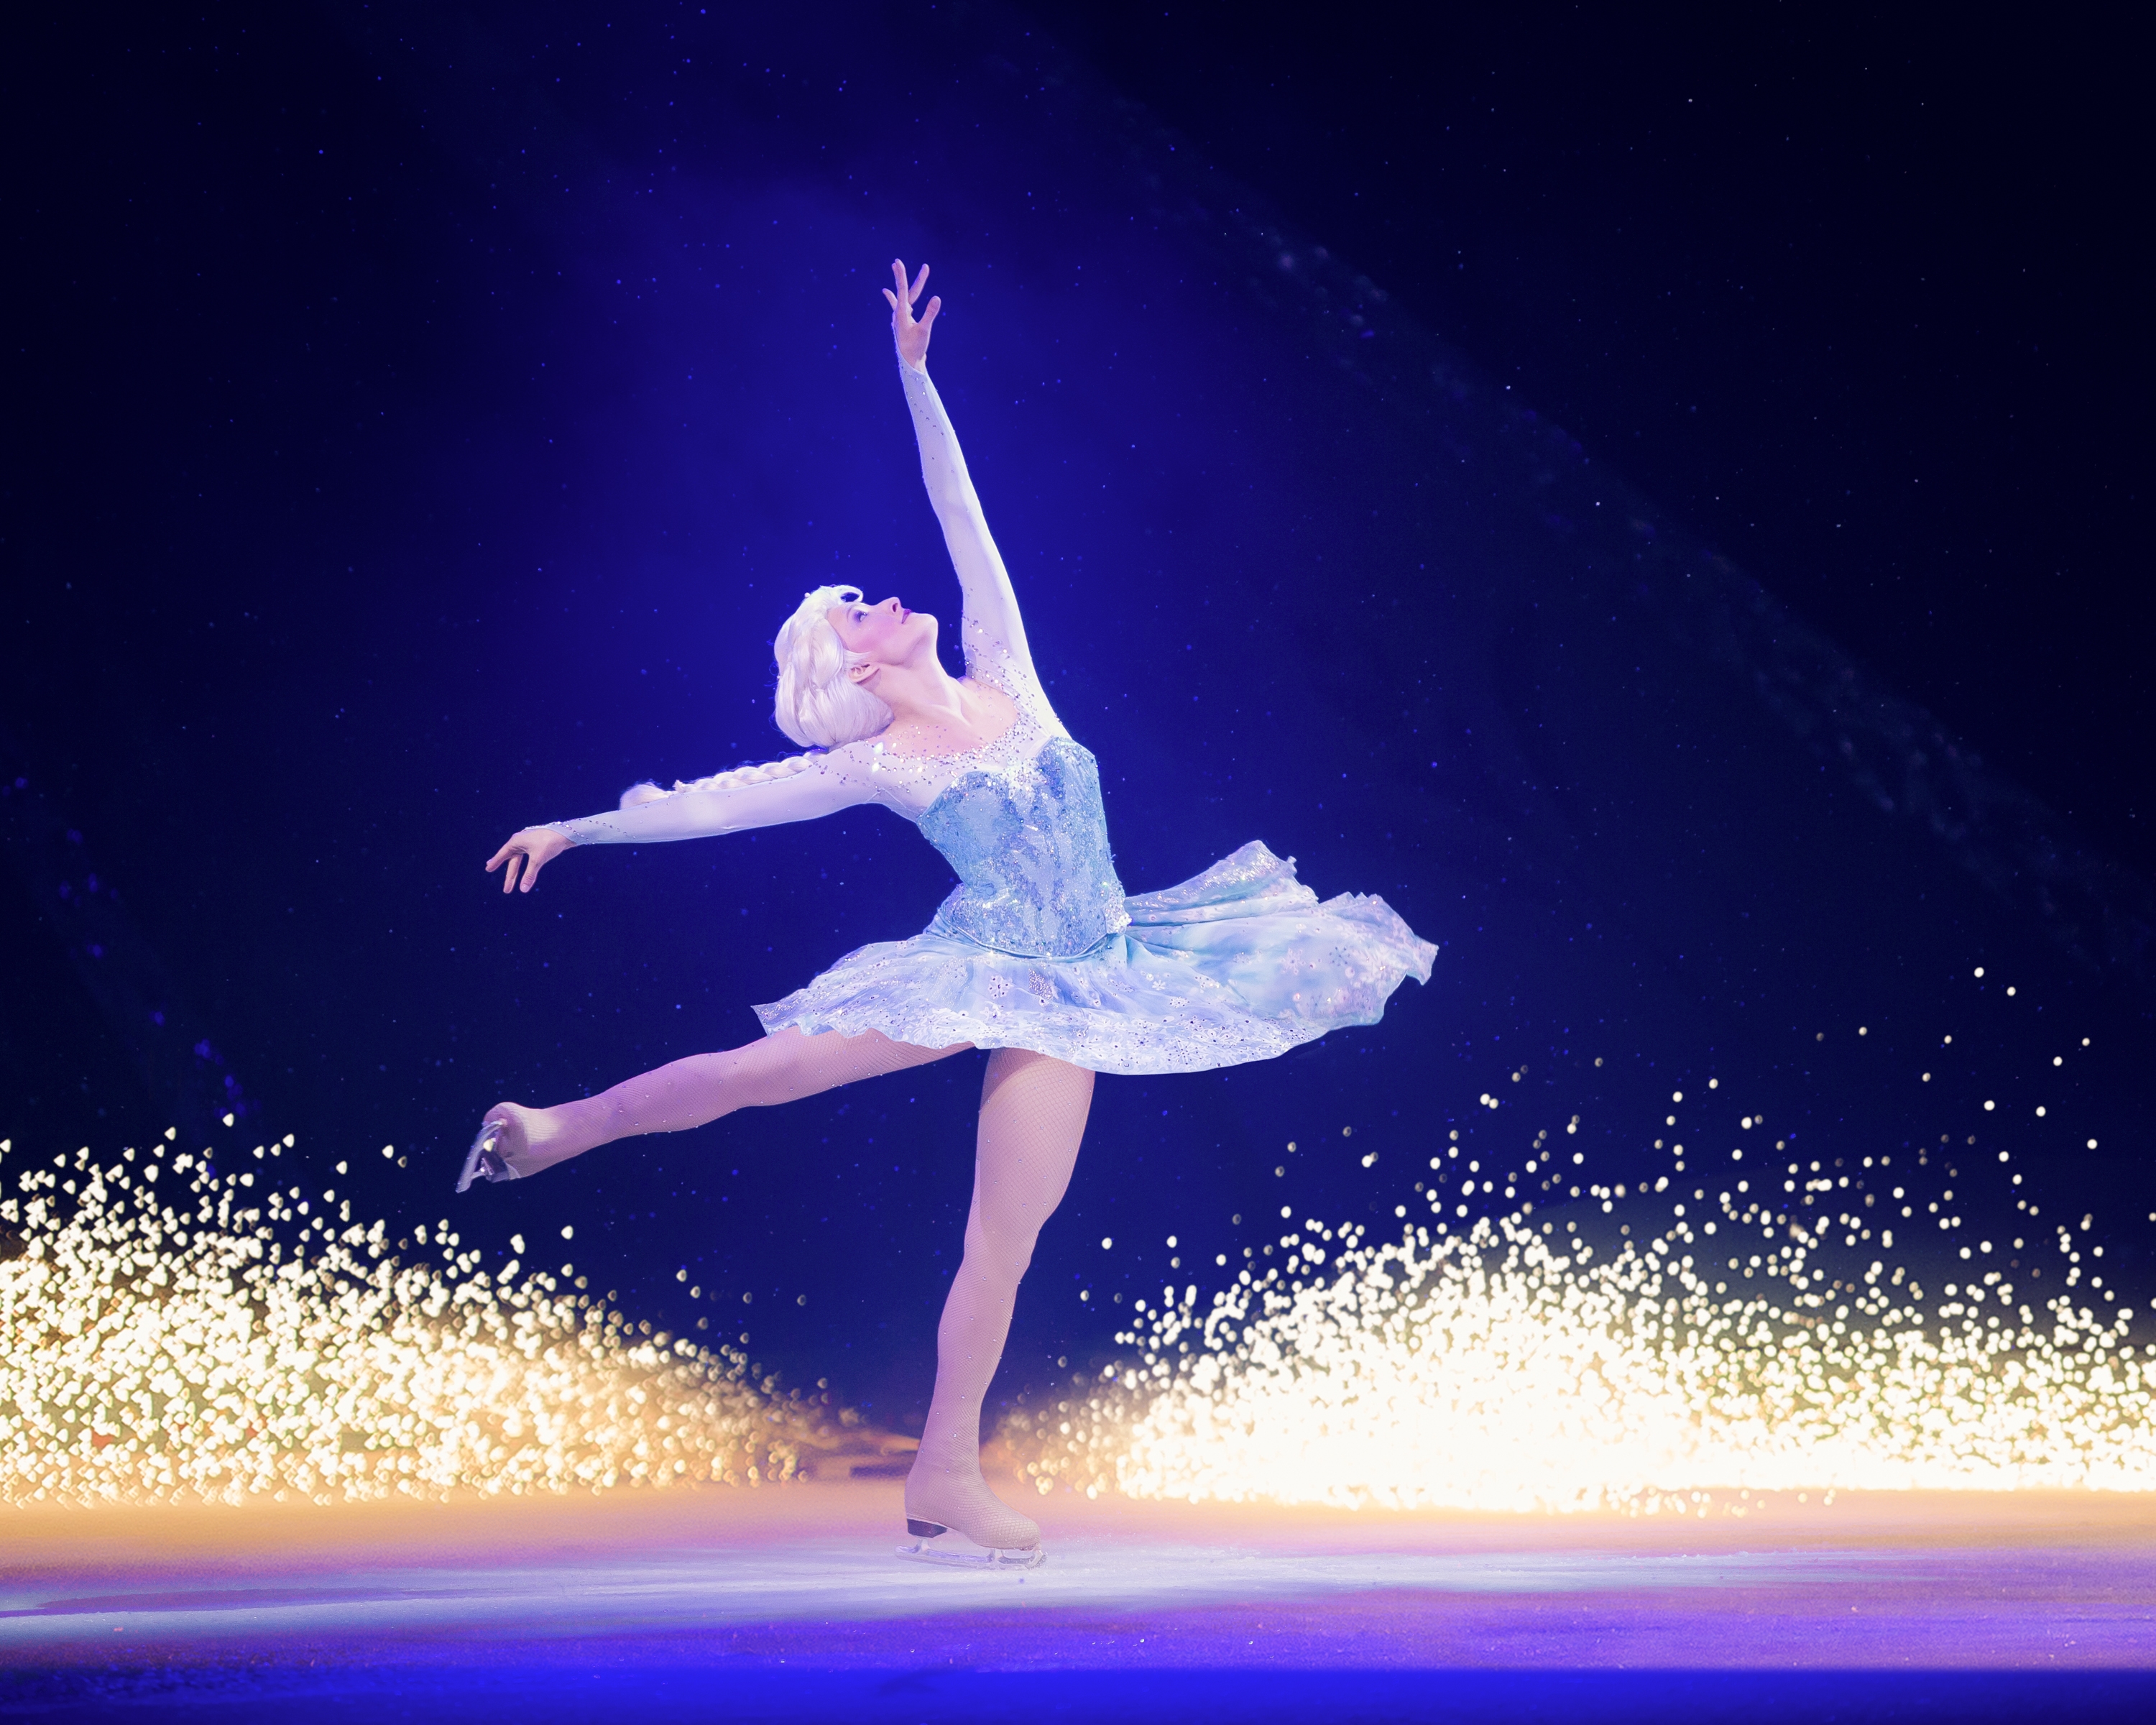 ANOTHER GIVEAWAY: Win a 4 Pack of Disney on Ice Frozen Tickets!